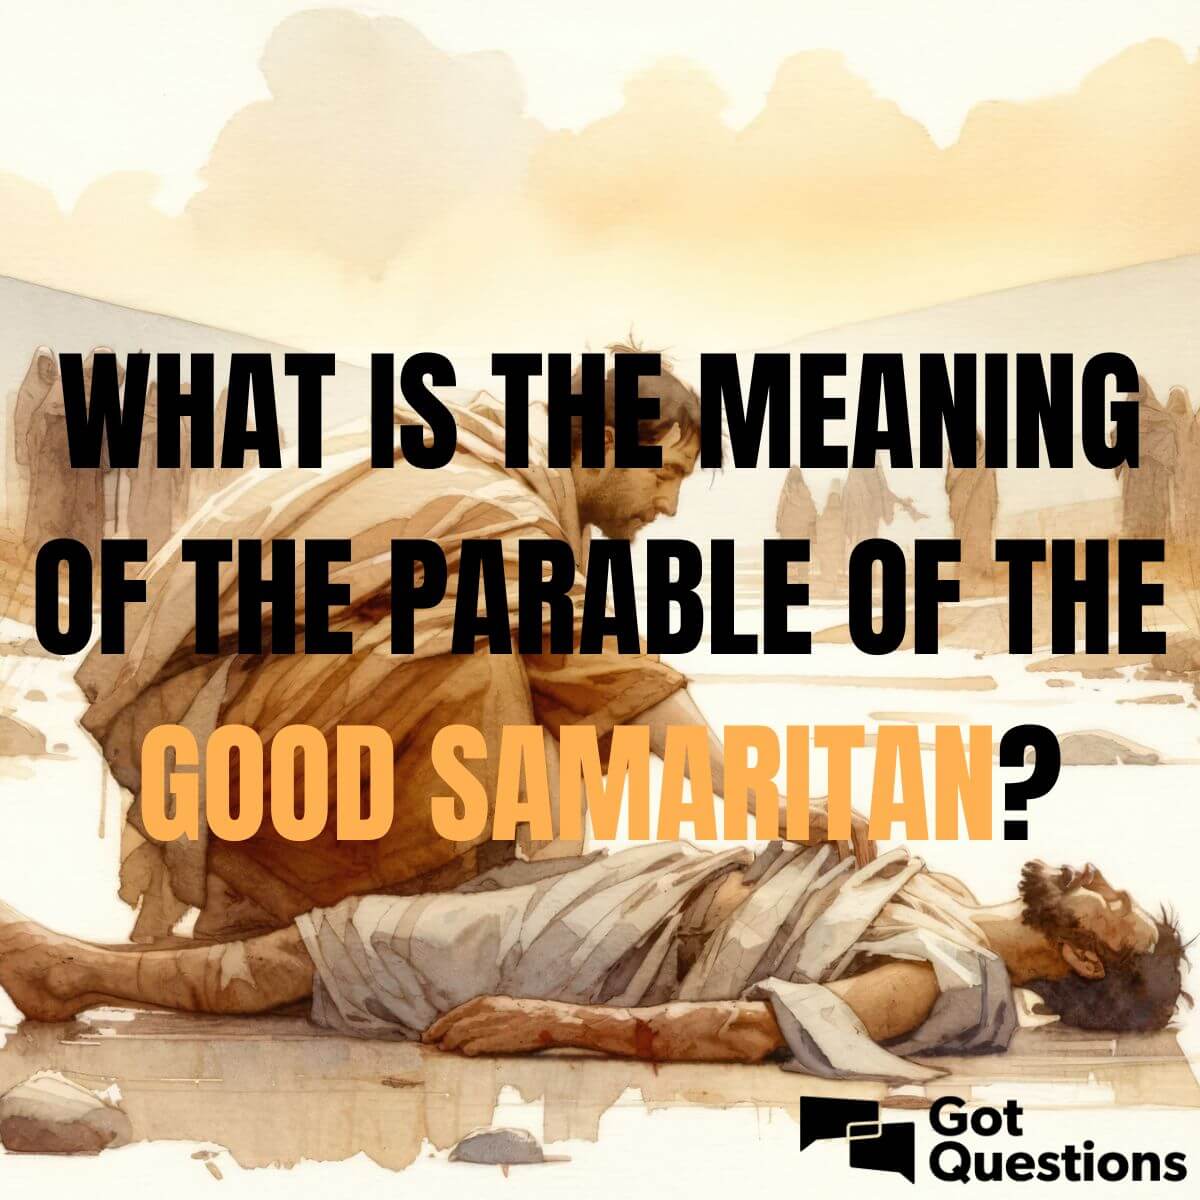 What is the meaning of the Parable of the Good Samaritan?